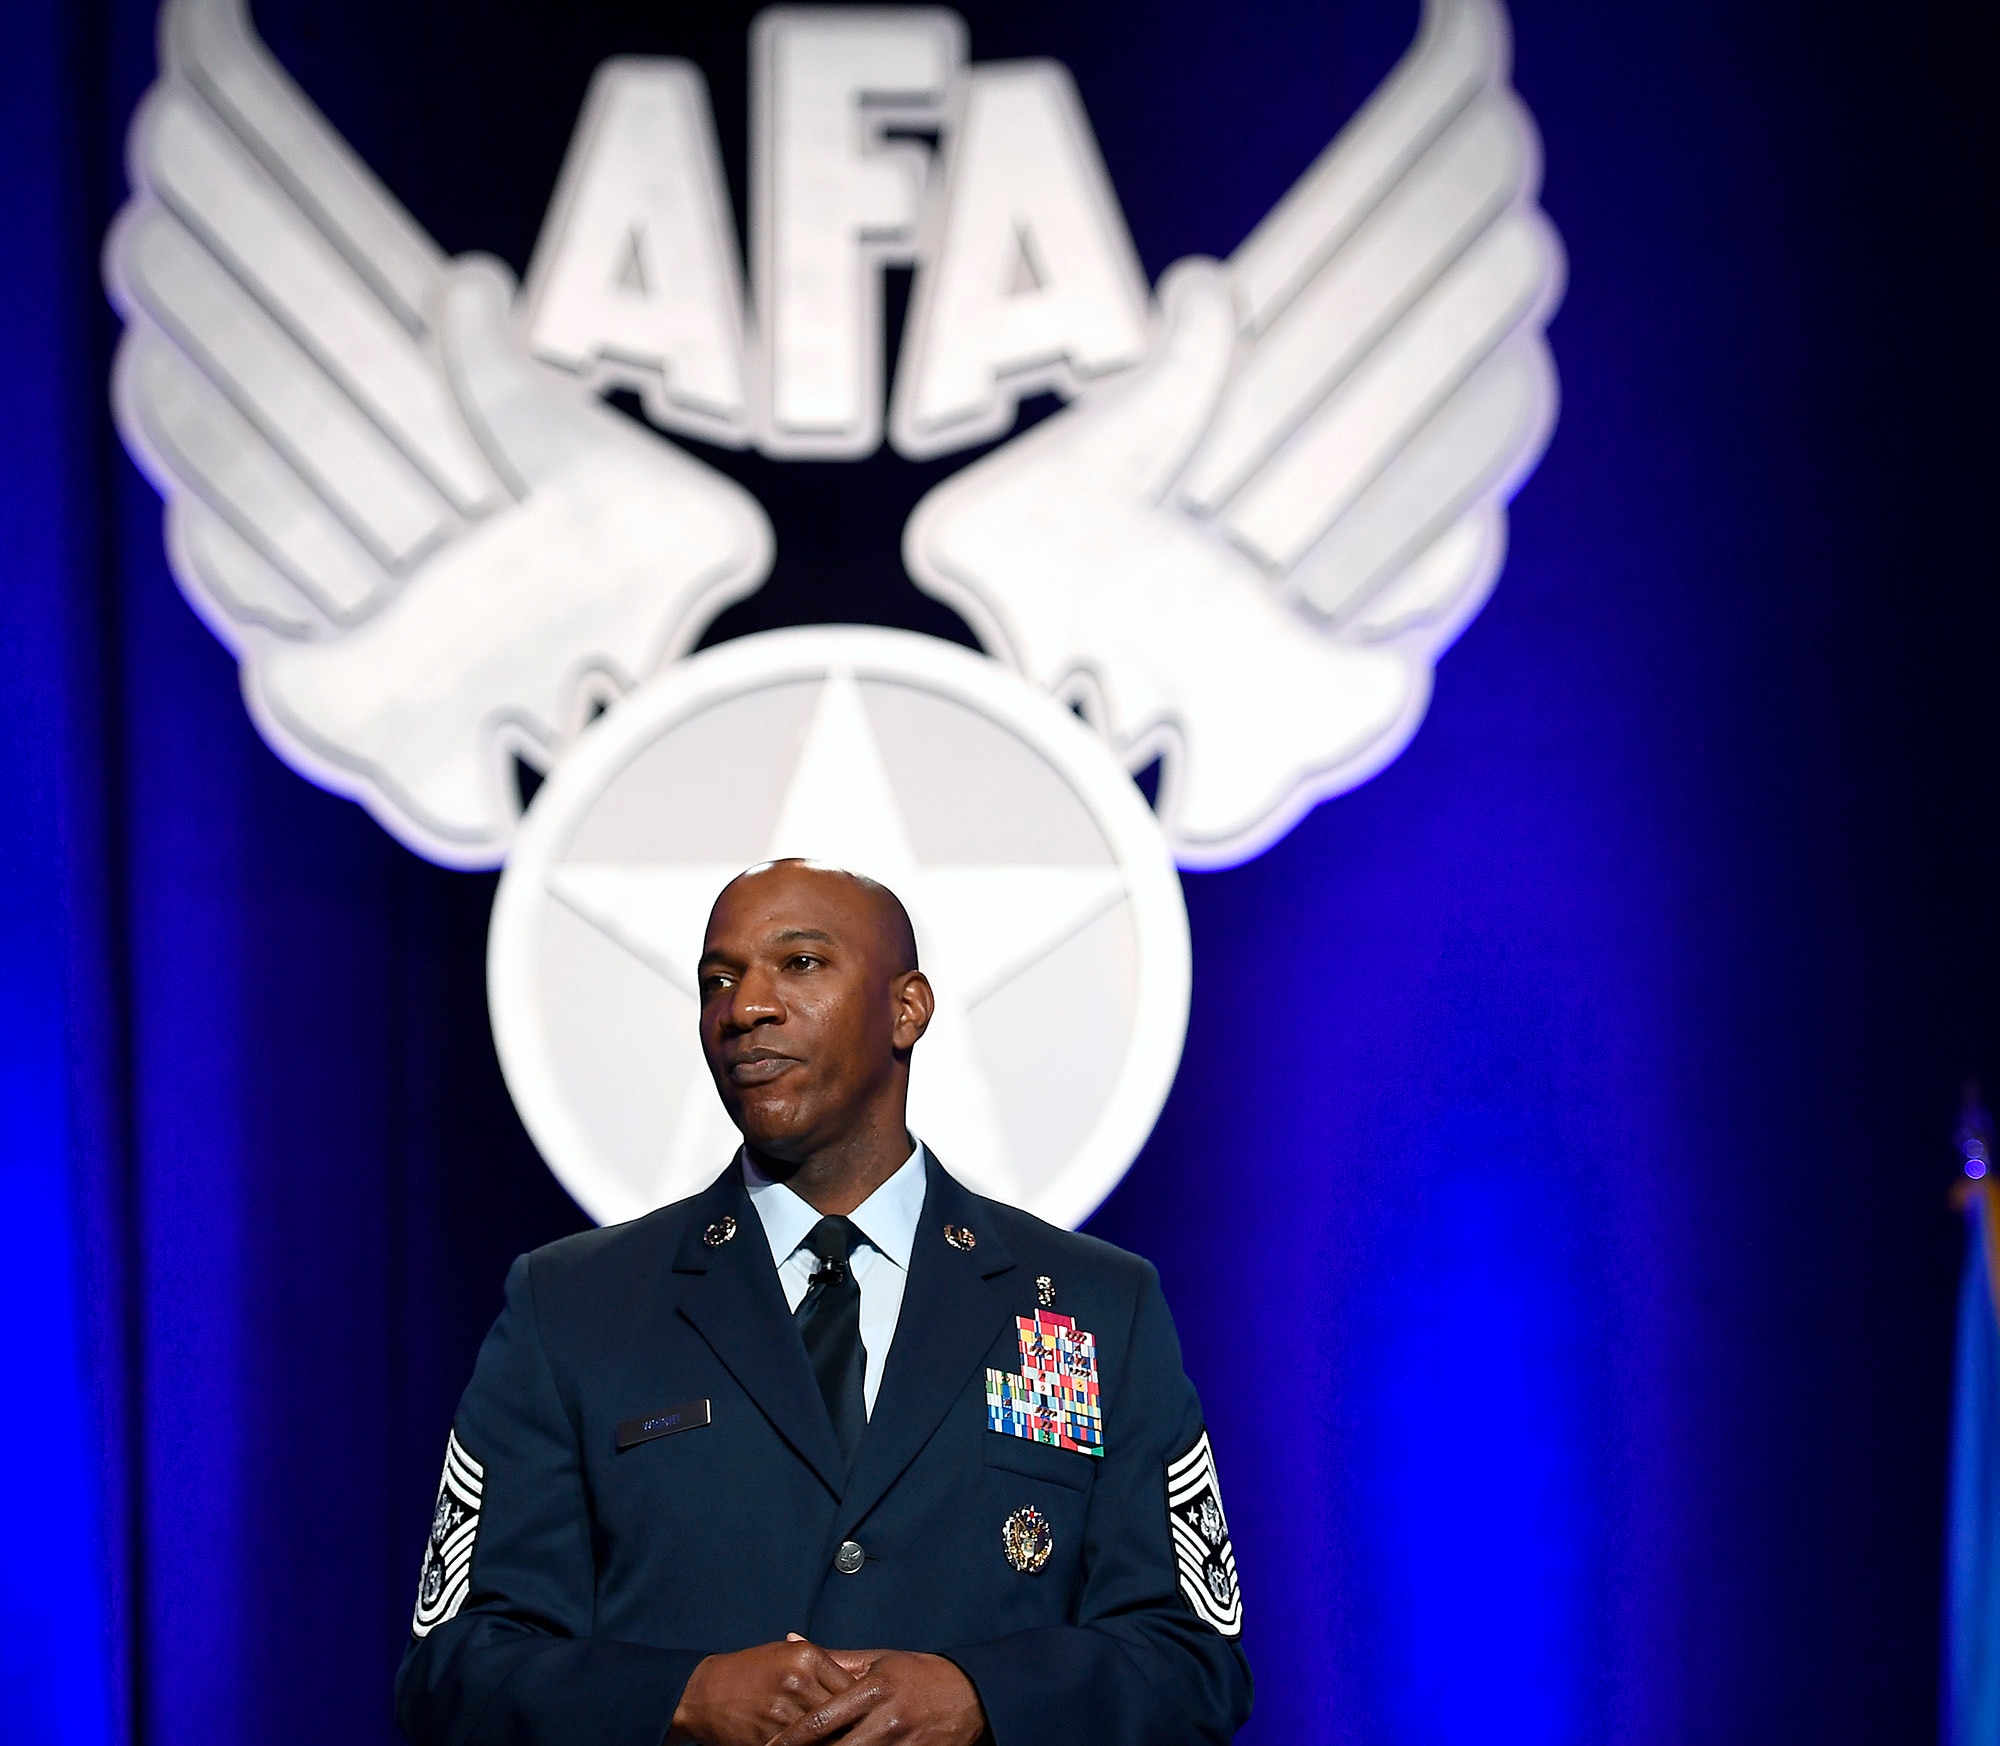 Chief Master Sgt. of the Air Force Kaleth O. Wright speaks about leading Airmen at the Air Force Association Air Warfare Symposium March 2, 2017, in Orlando, Fla. (U.S. Air Force photo/Scott M. Ash)